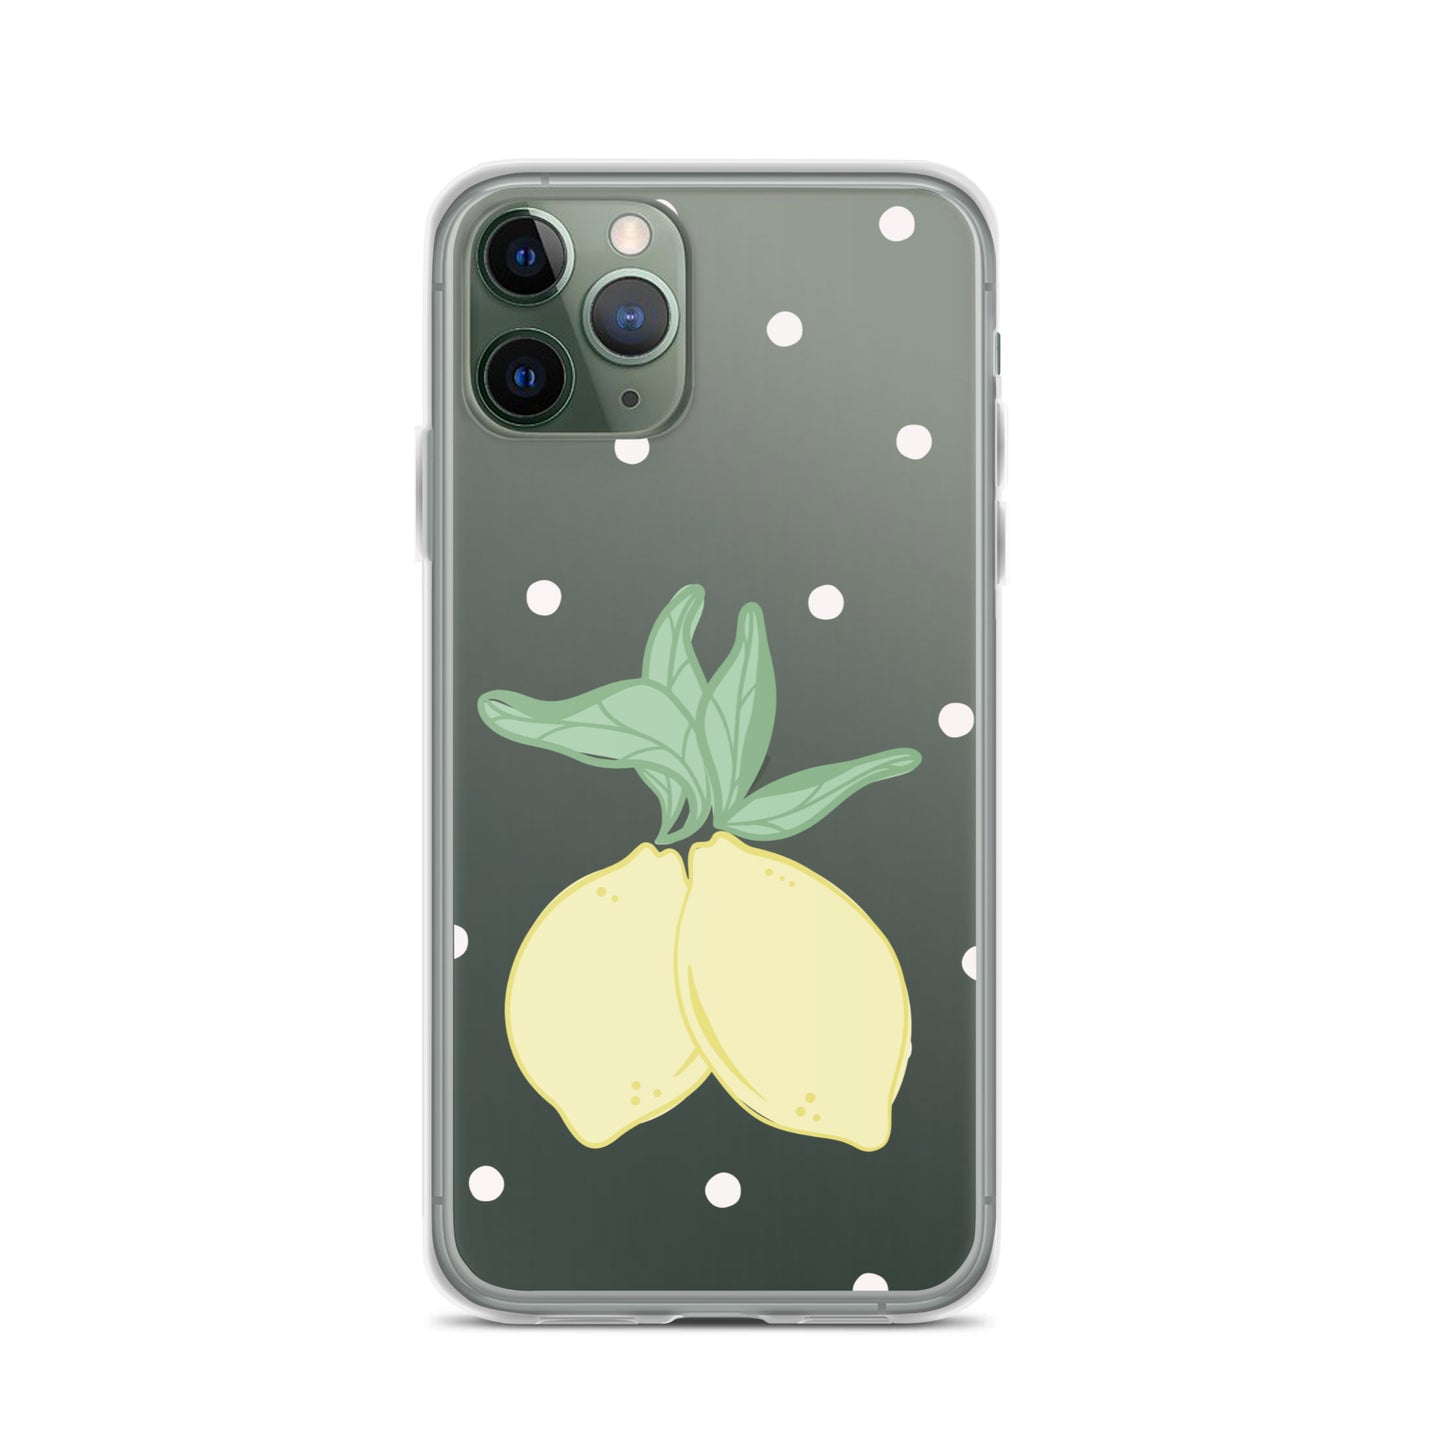 Easy Peasy Lemon Squeezy Clear iPhone Case